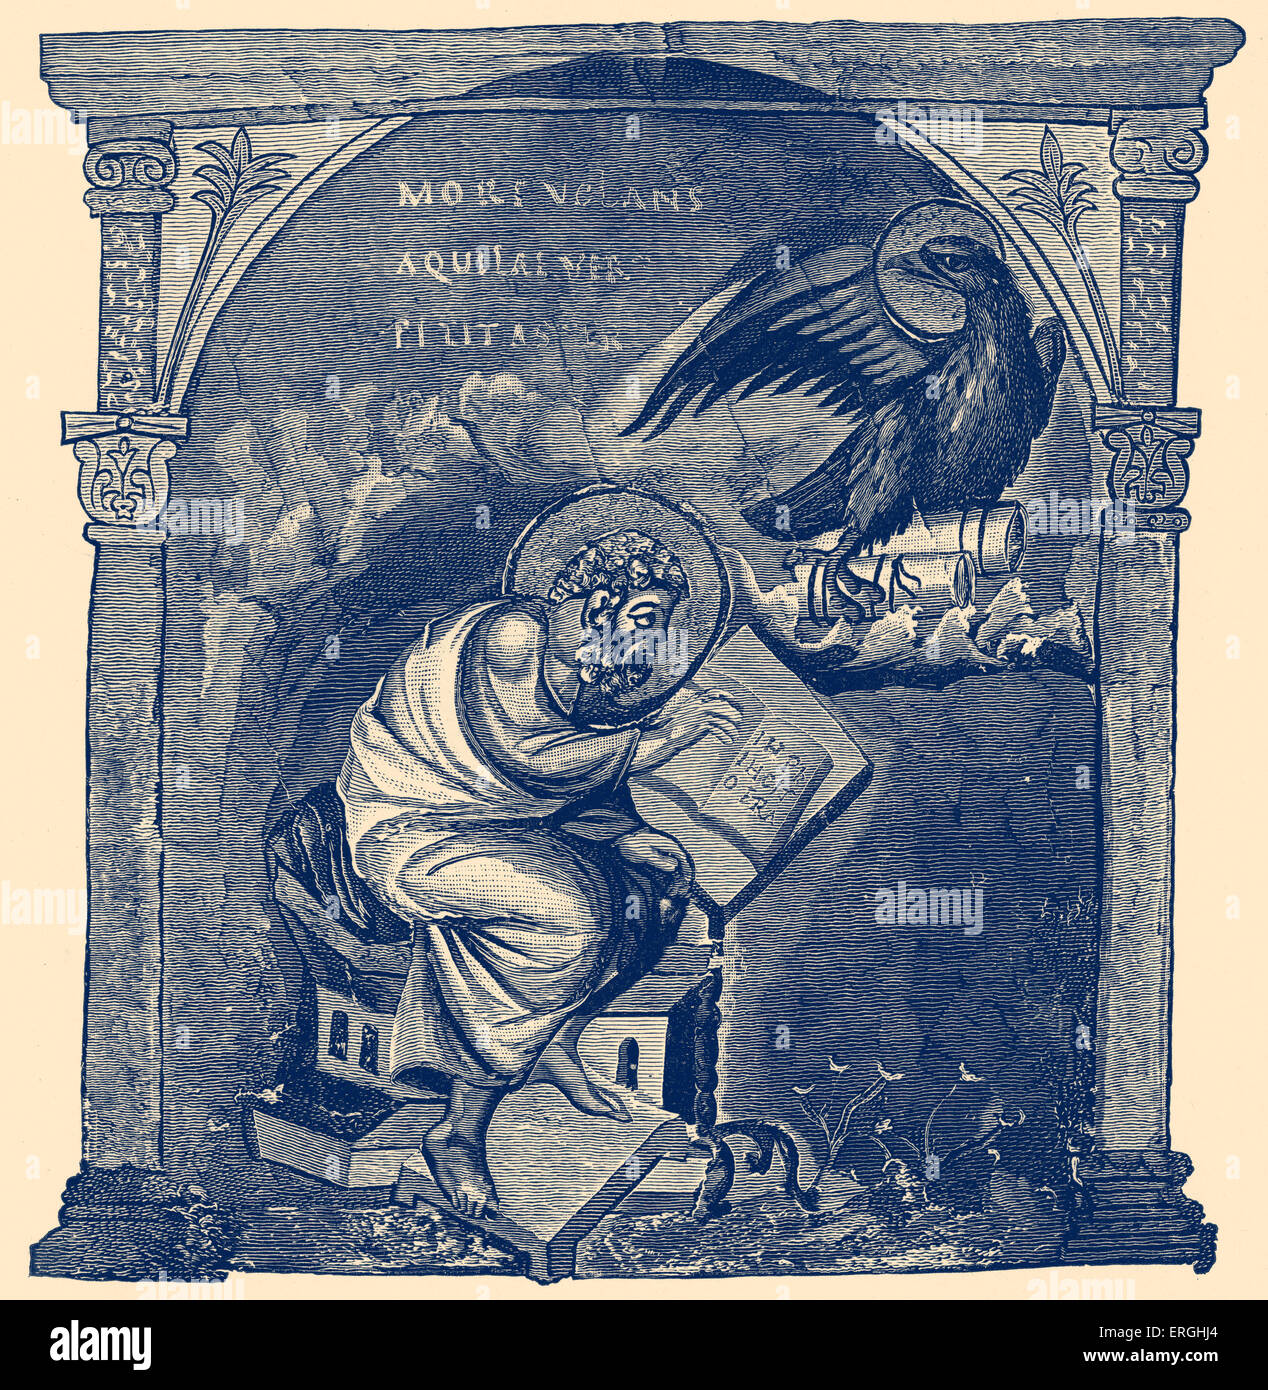 St John the Evangelist. From illustration in Gospel book given by Otto I. To Aethelstan. 19th century reproduction. Stock Photo